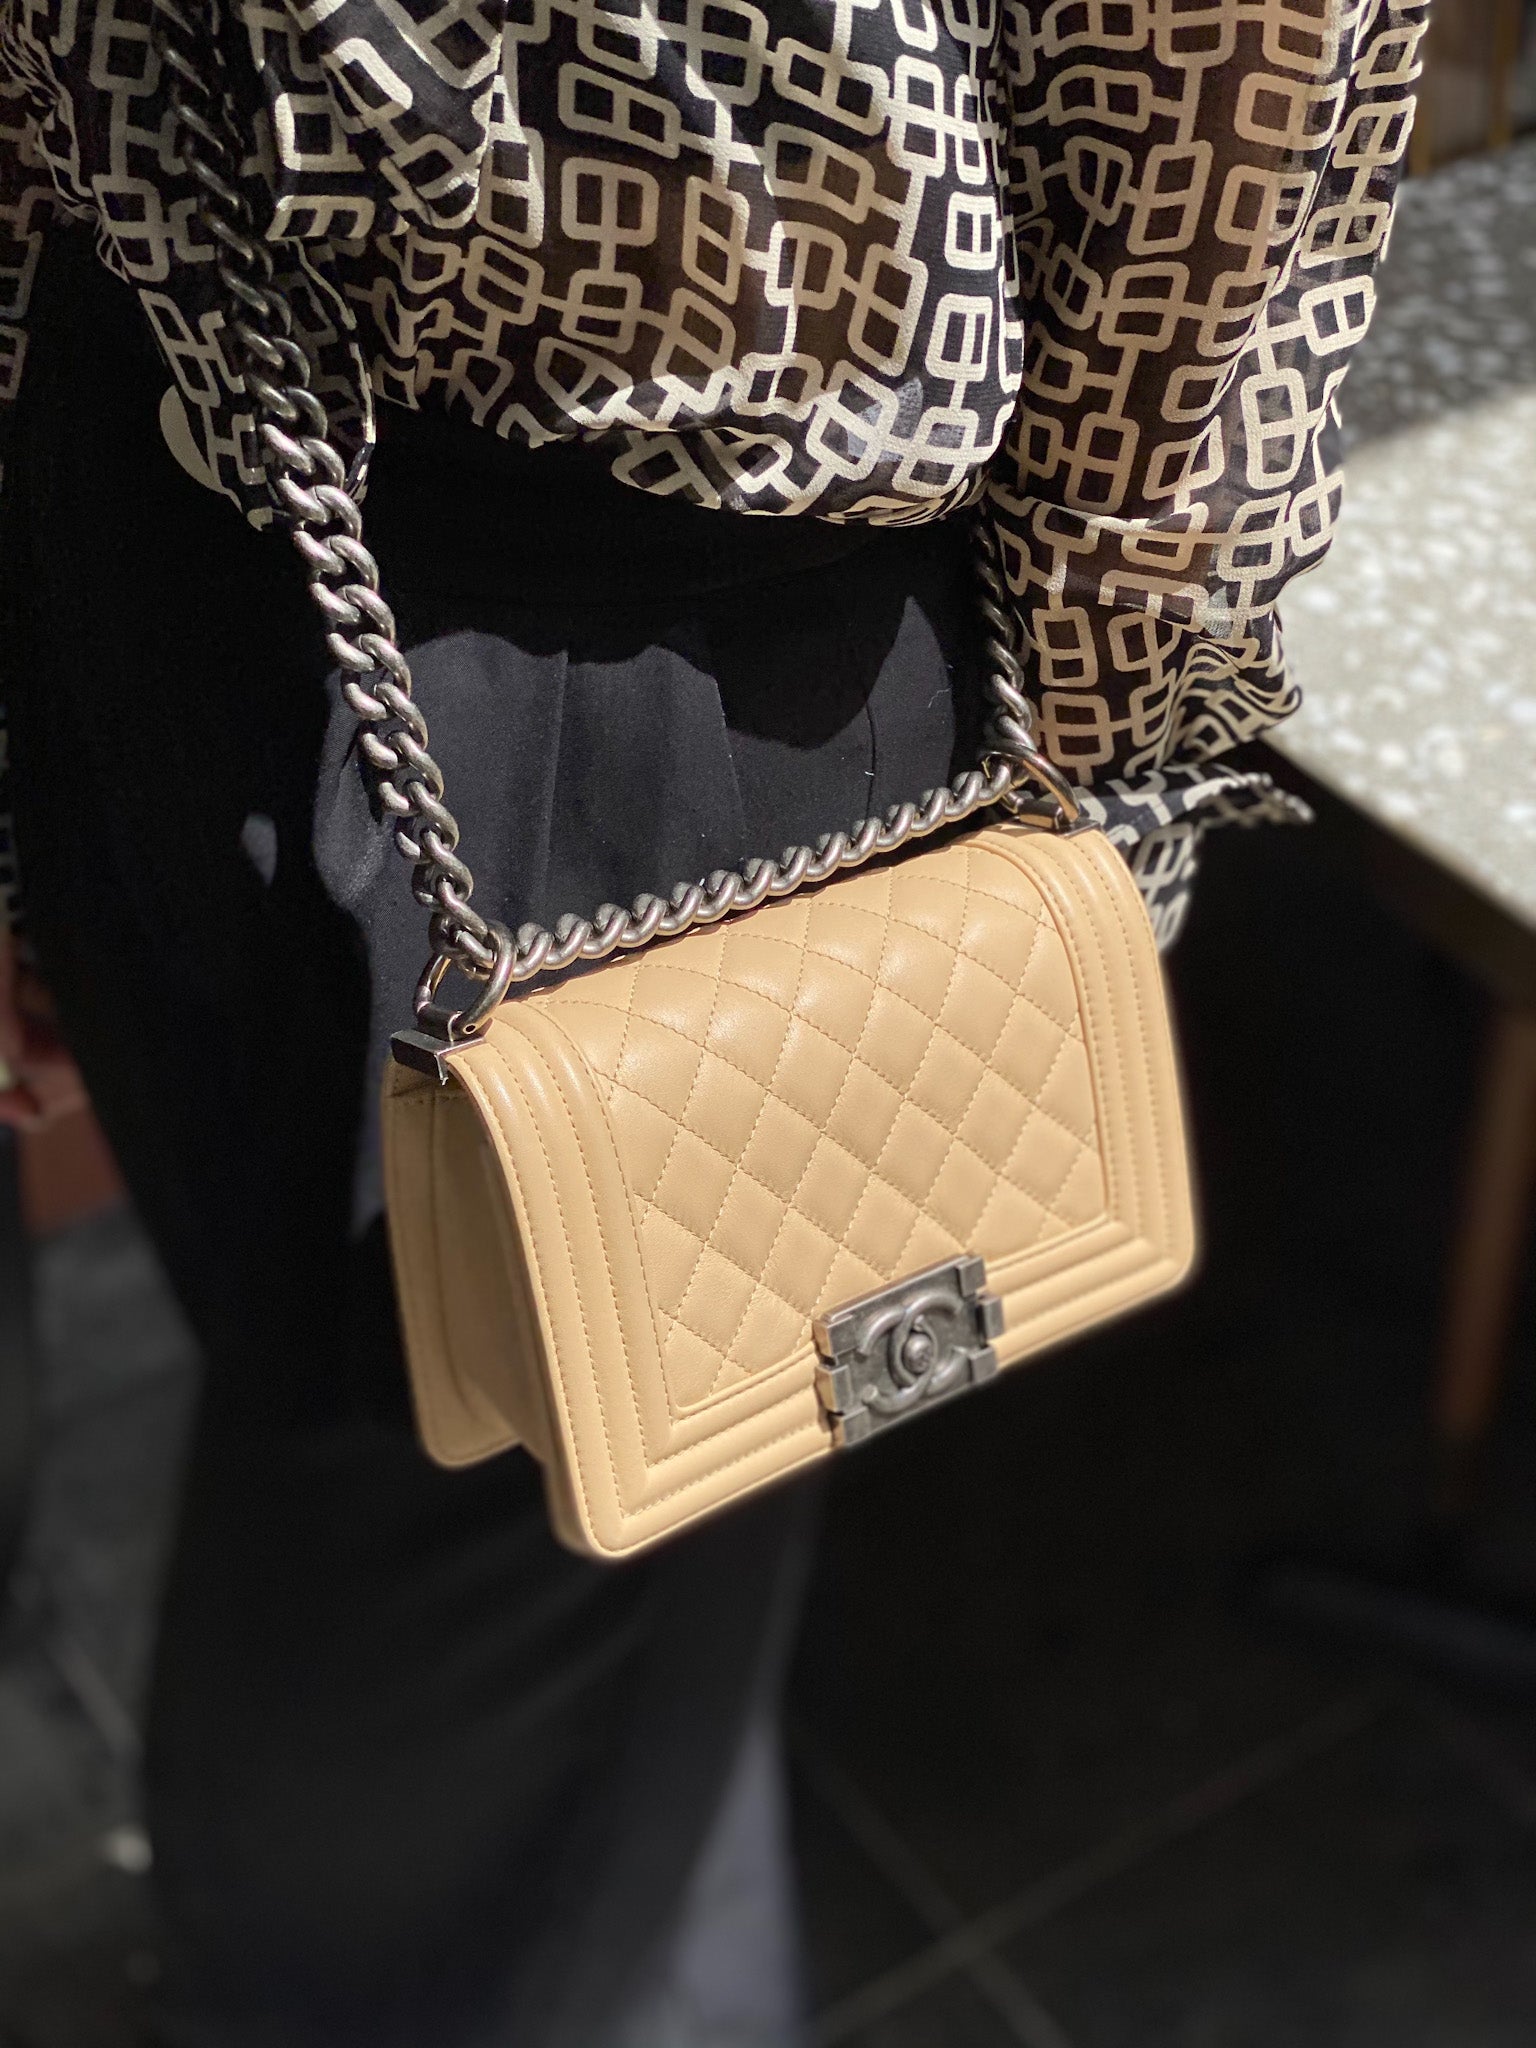 Chanel Small Flat Quilted Coco Luxe Flap Bag Light Beige Aged Gold Har –  Coco Approved Studio